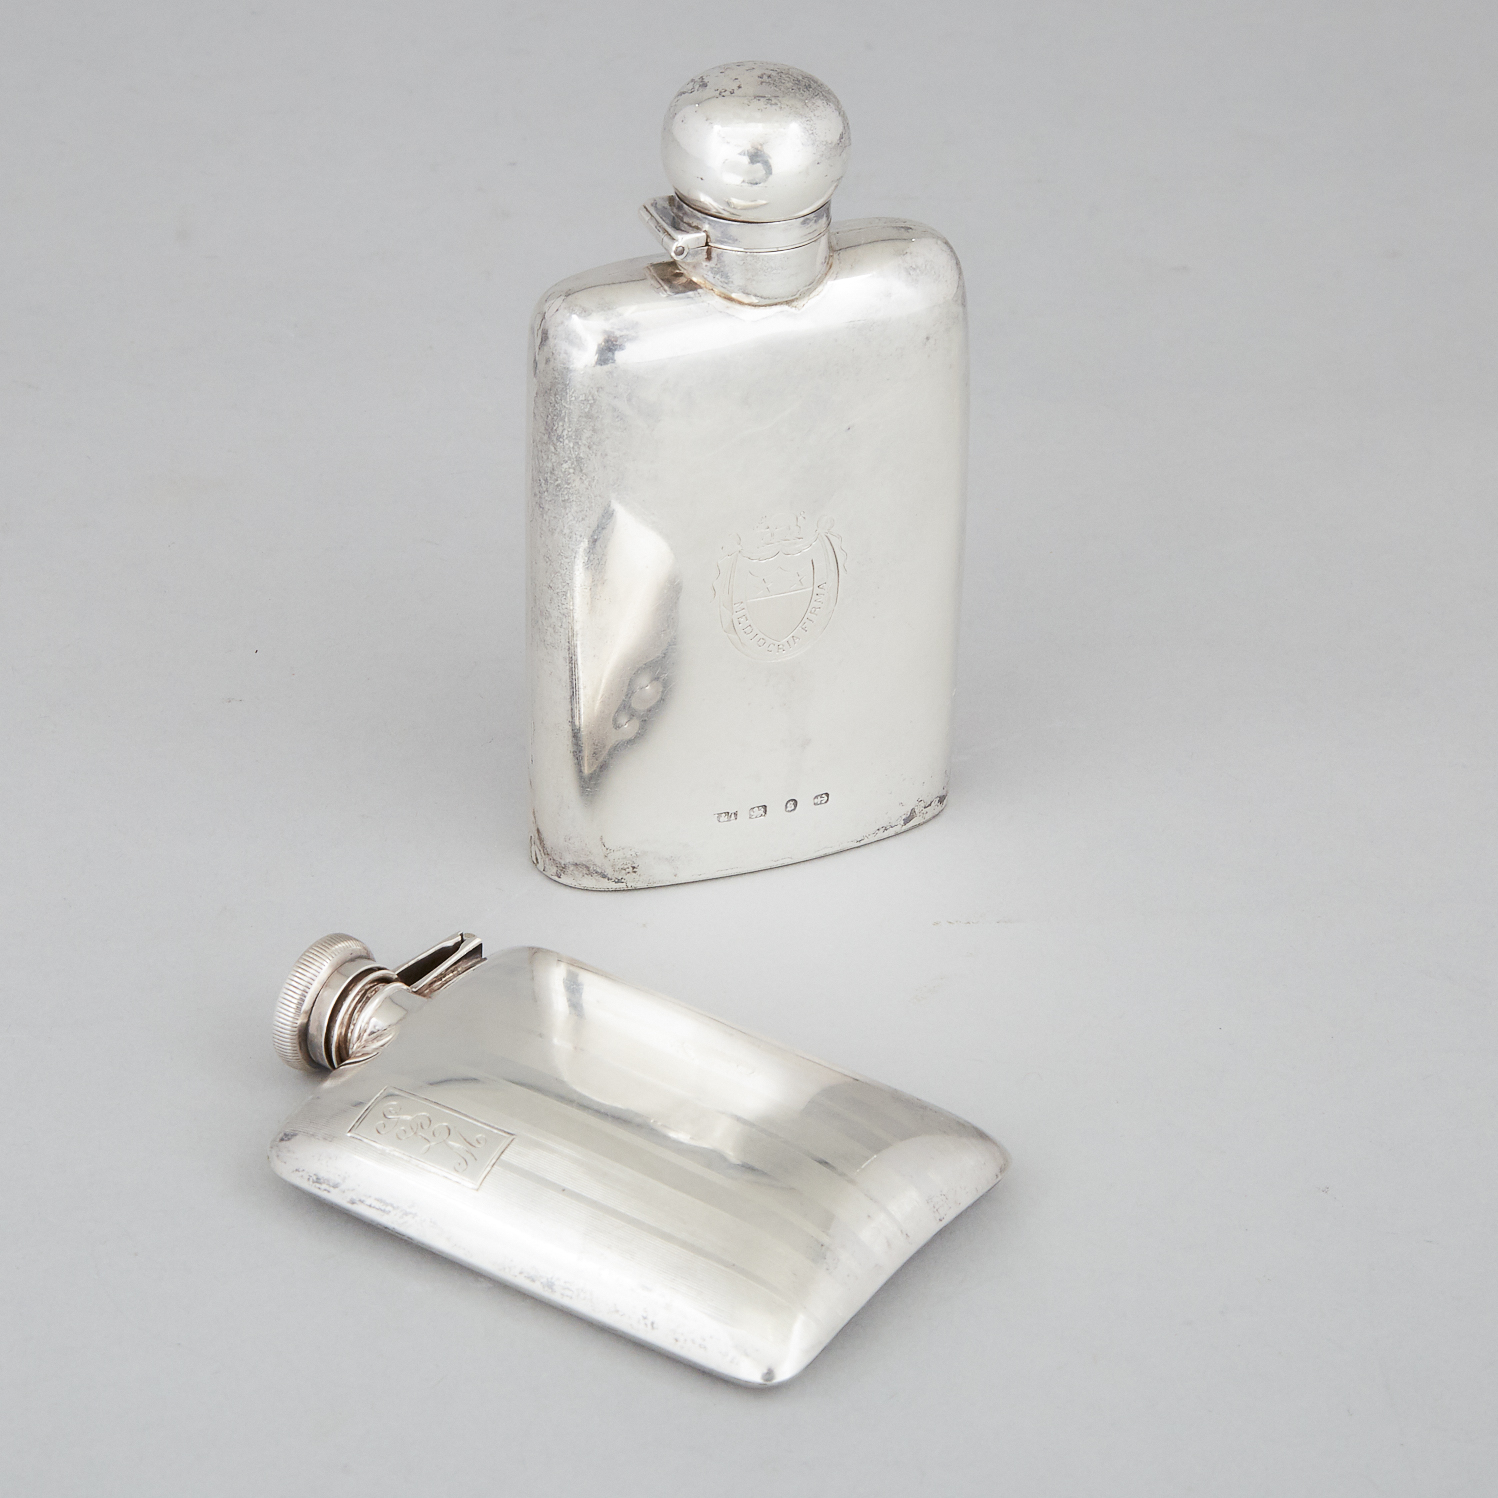 Late Victorian Silver Spirit Flask, Hilliard & Thomason, Birmingham, 1892, and a Smaller American Flask, Webster Co., North Attleboro, Mass., early 20th century